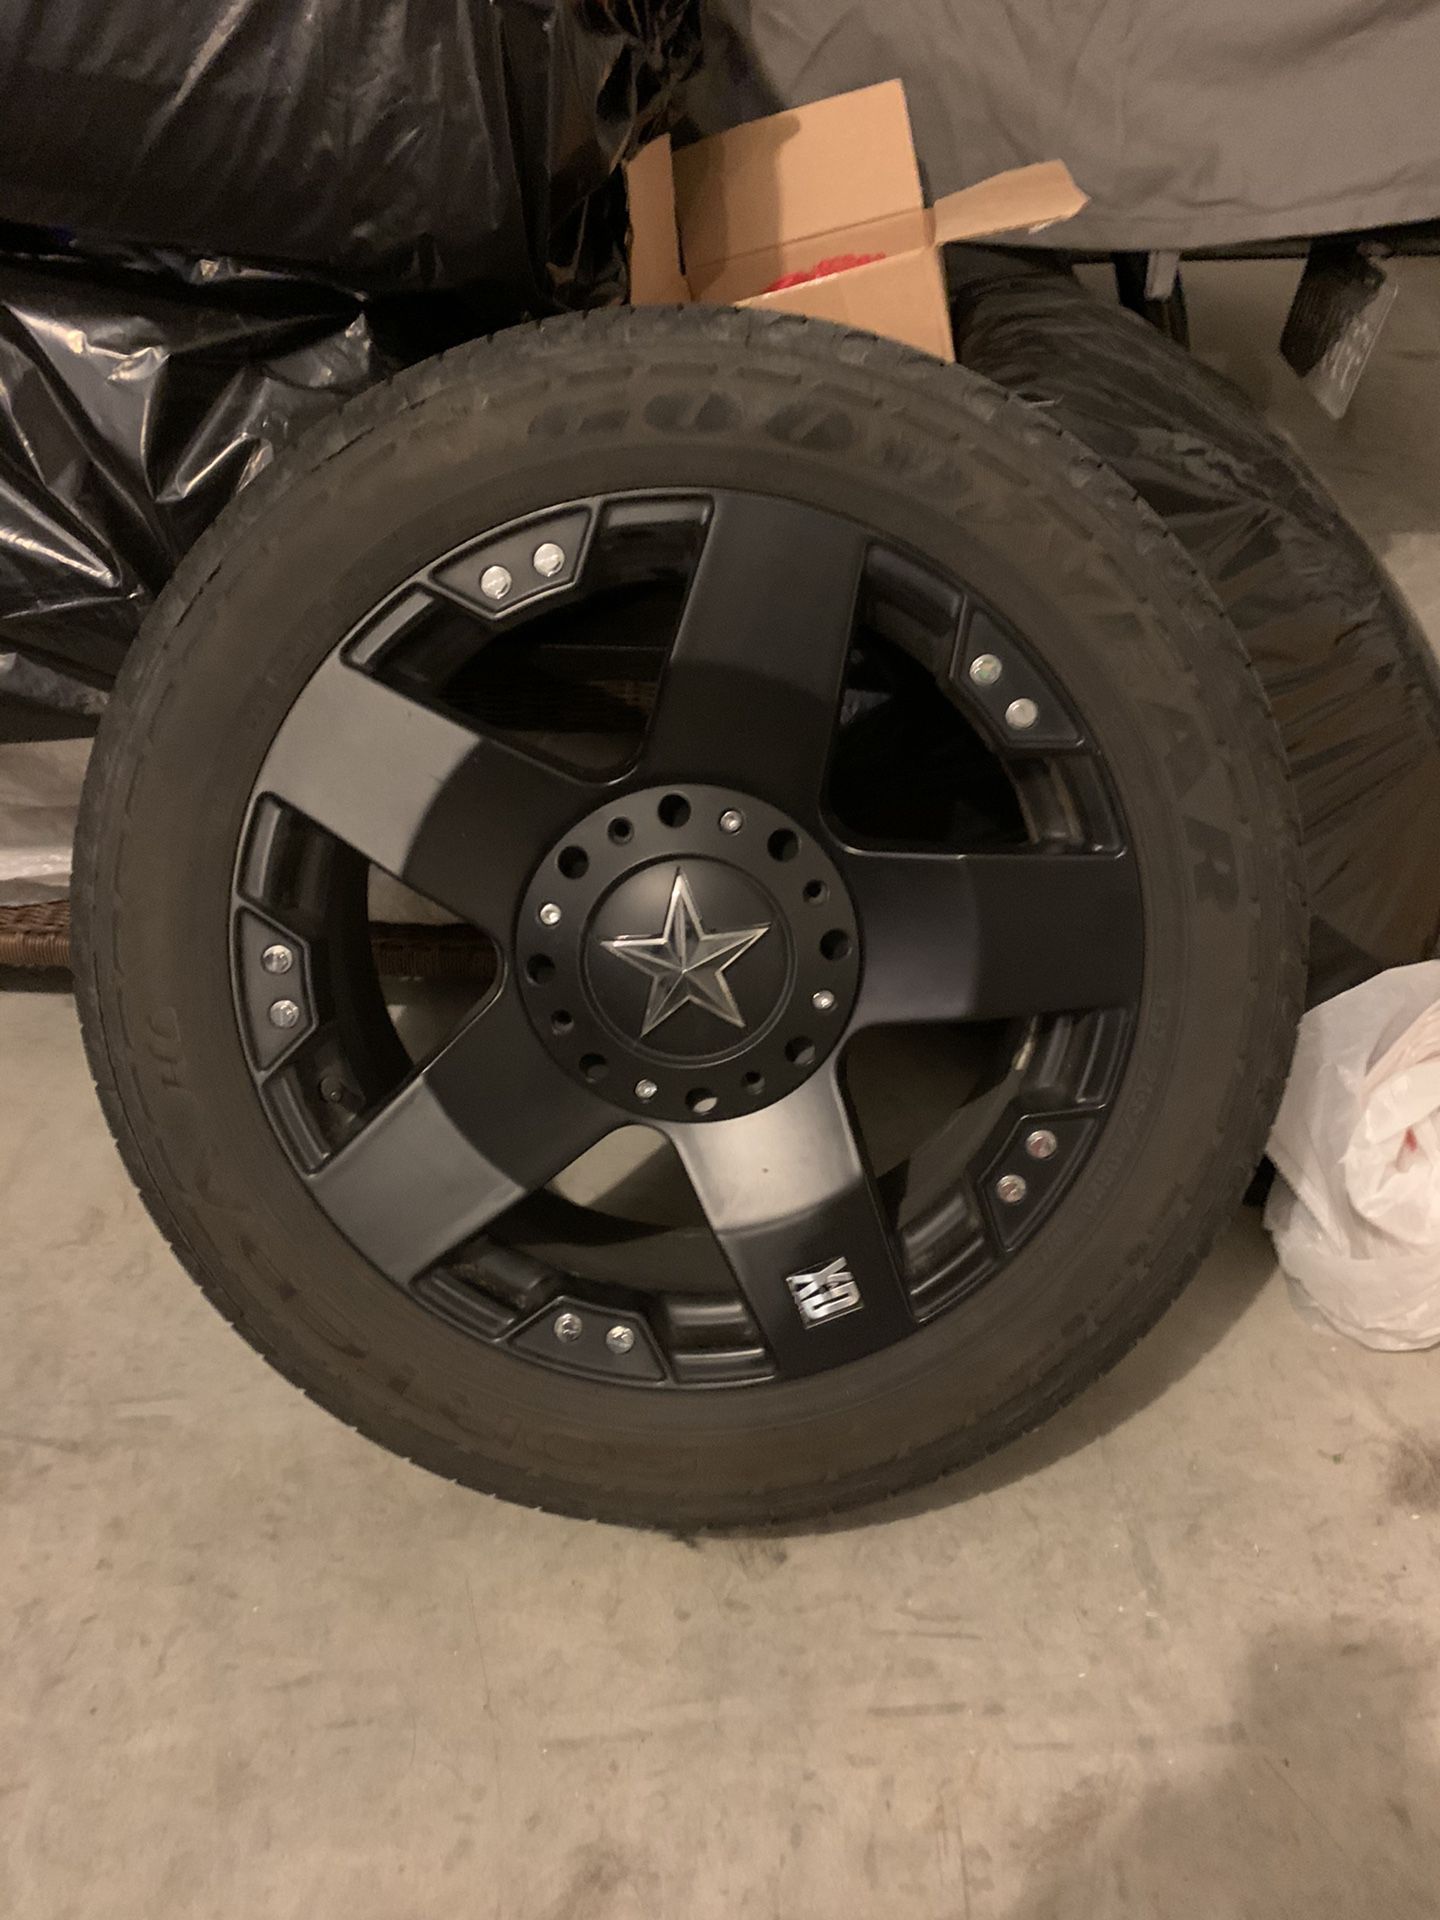 Rockstar Wheels 20” with Tires